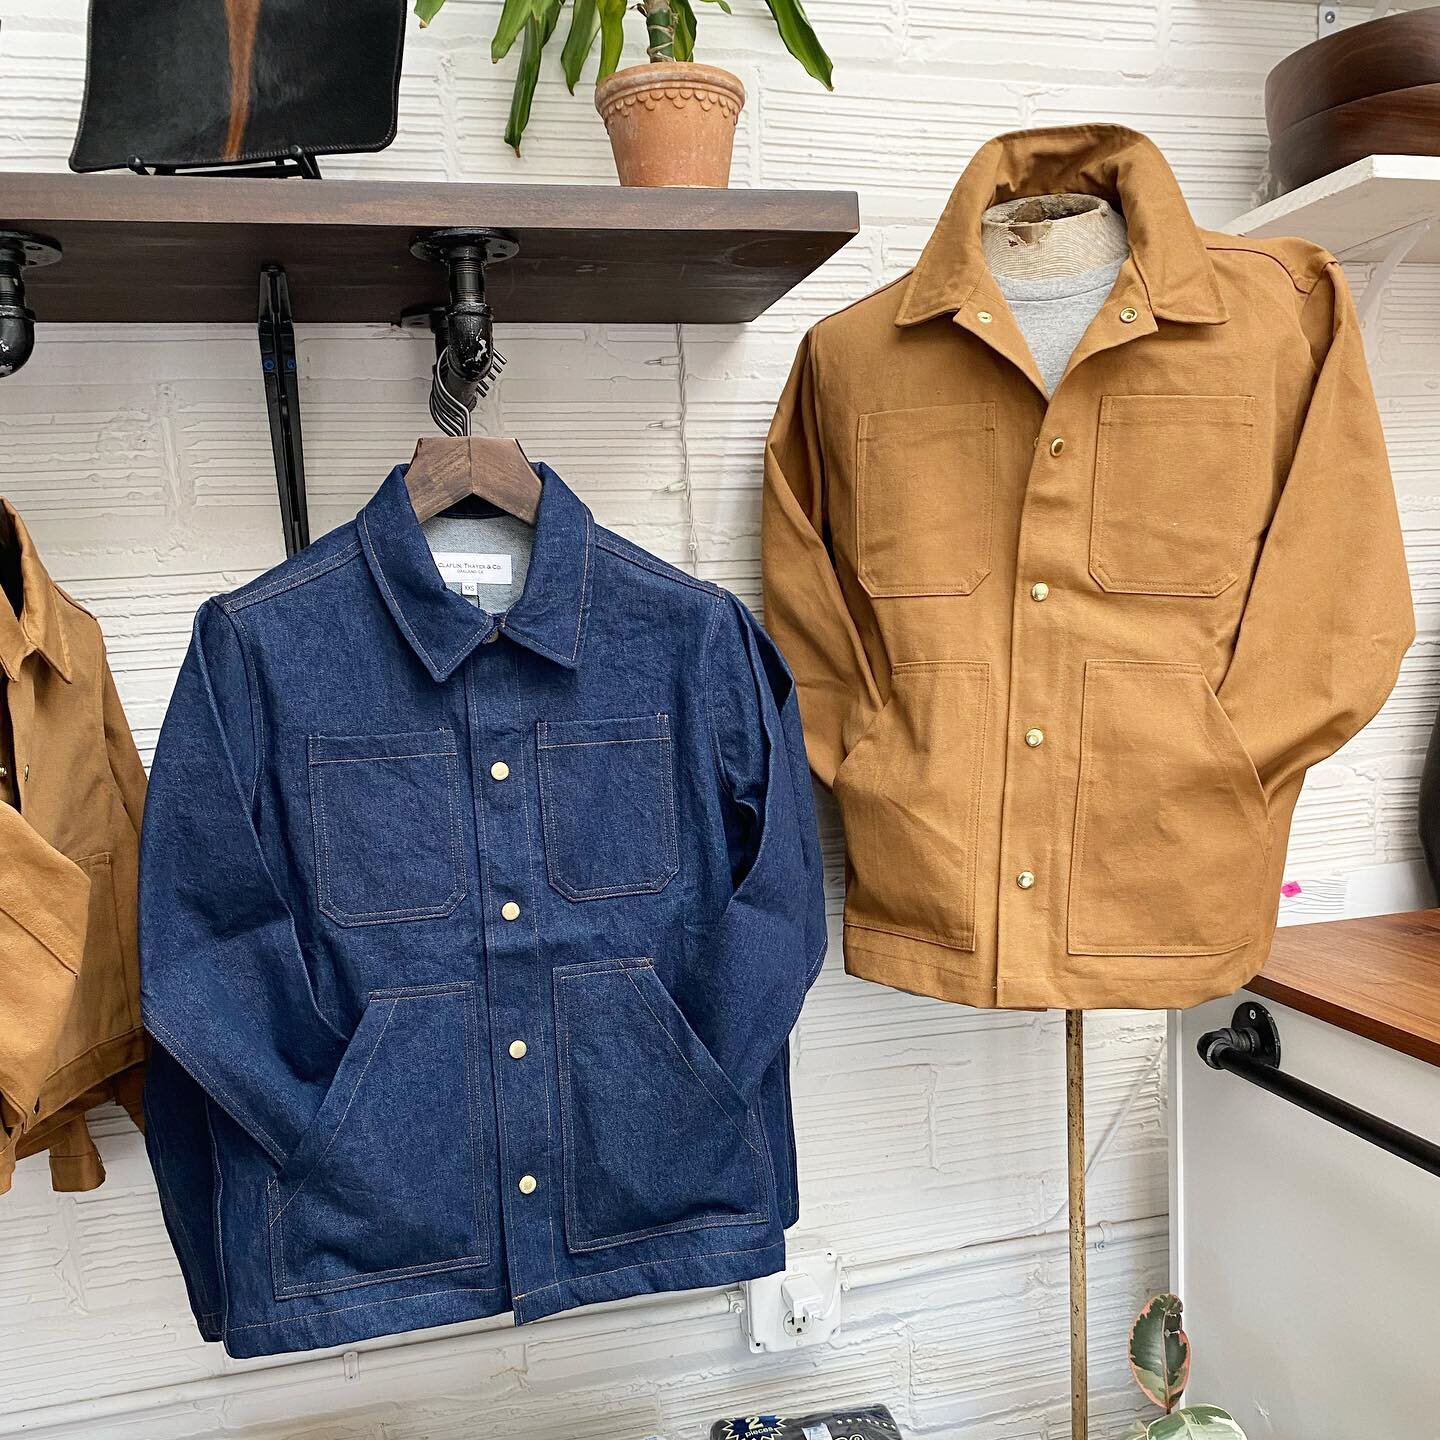 New chore coats in stock!

Black, natural, cider, and a very limited edition of Cone Denim styles. More info in stories.

#chorecoat #madeinusa #madeinoakland